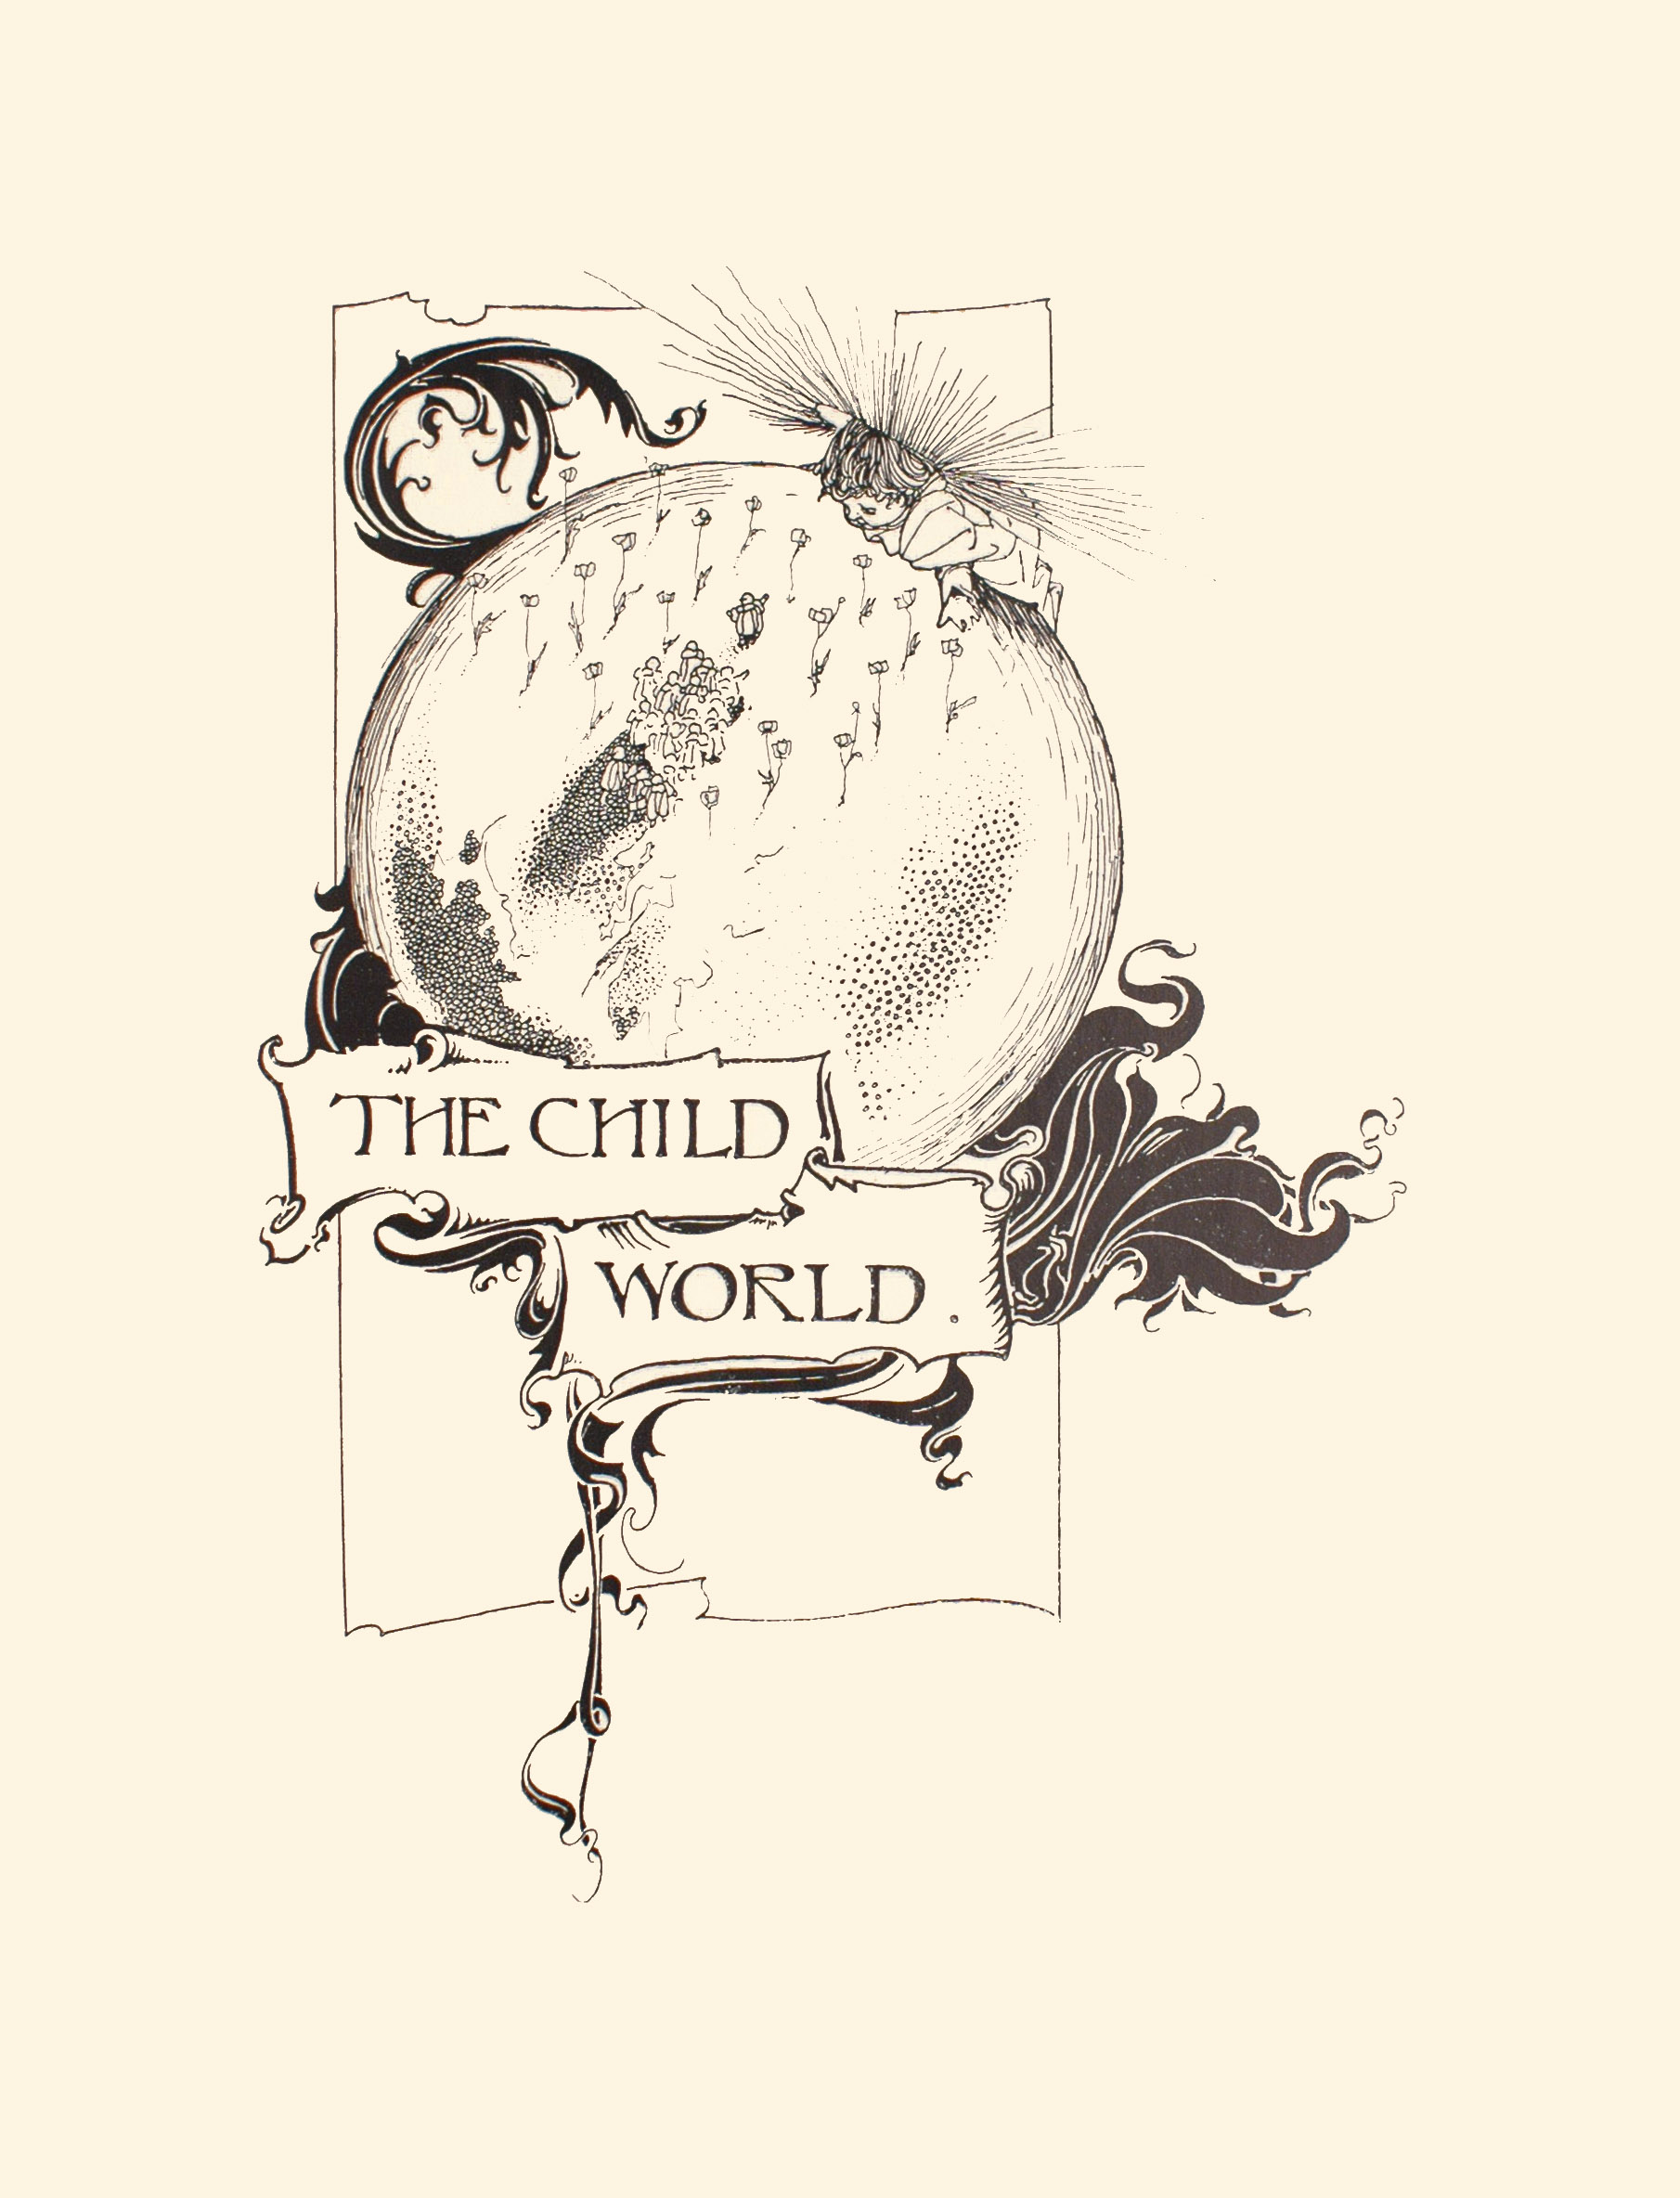 Image is of a child perched atop the upper right hand side of a globe The child has rays of light coming out the crown of his head He is leaning downward toward the globe his hands are stretched out The globe s presentation of countries and water is not shown through lines but through dots and flowers In the middle of the globe is a small crowd of people one figure is standing apart from the group with arms open Underneath the globe is a banner reading THE CHILD WORLD The image is vertically displayed